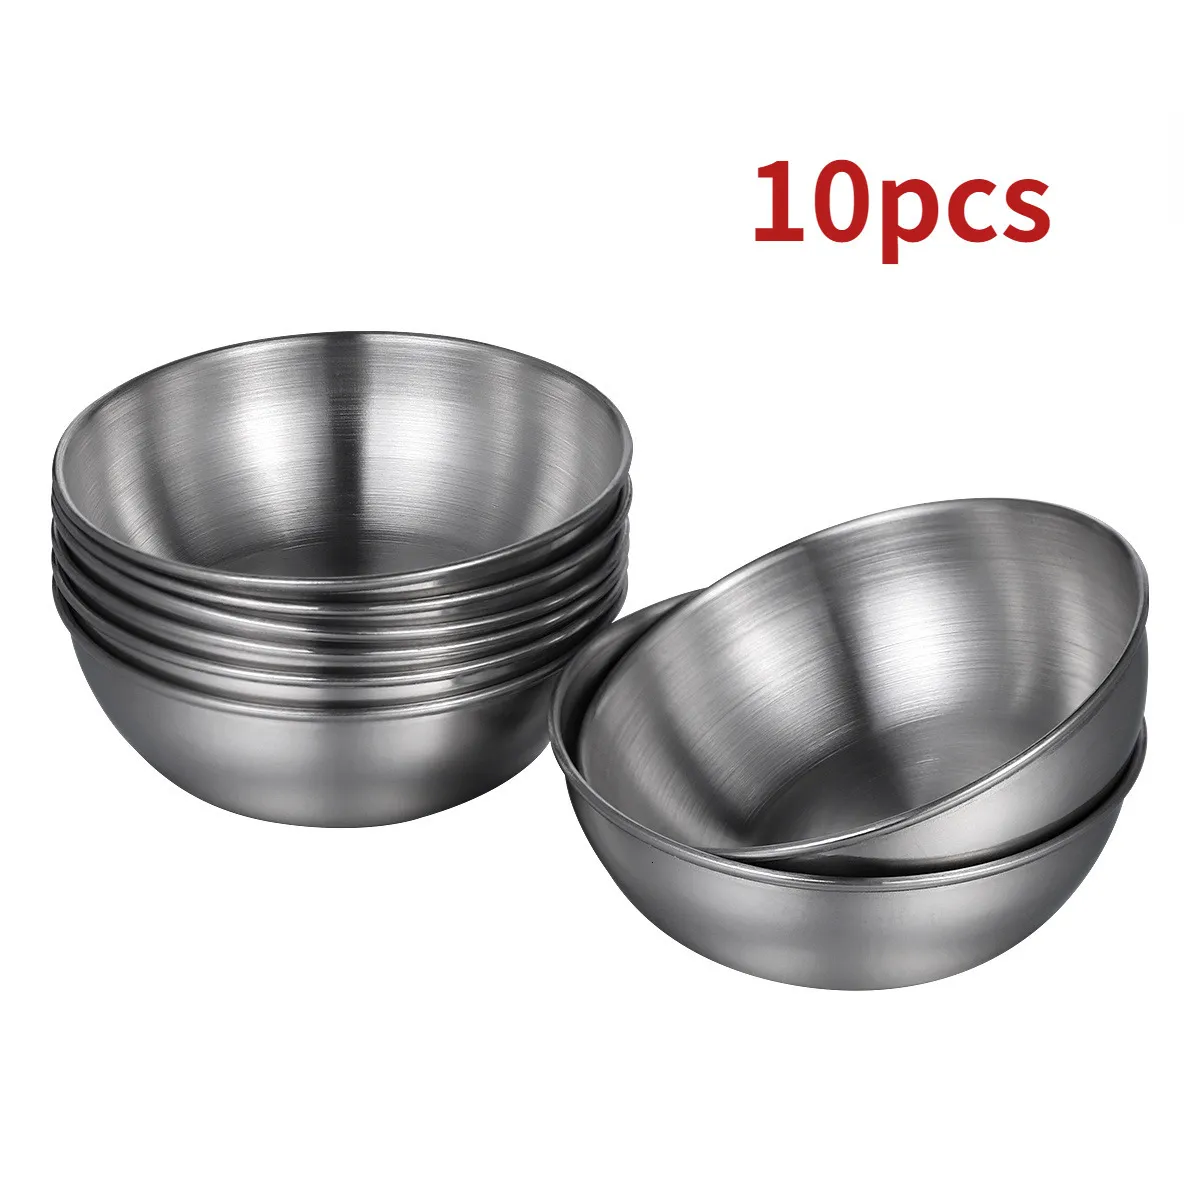 Herb Spice Tools 10pcs Stainless Steel Round Sauce Dishes Food Dipping Bowls Saucer Appetizer Plates Sauce Storage Container Kitchen Tools 221203